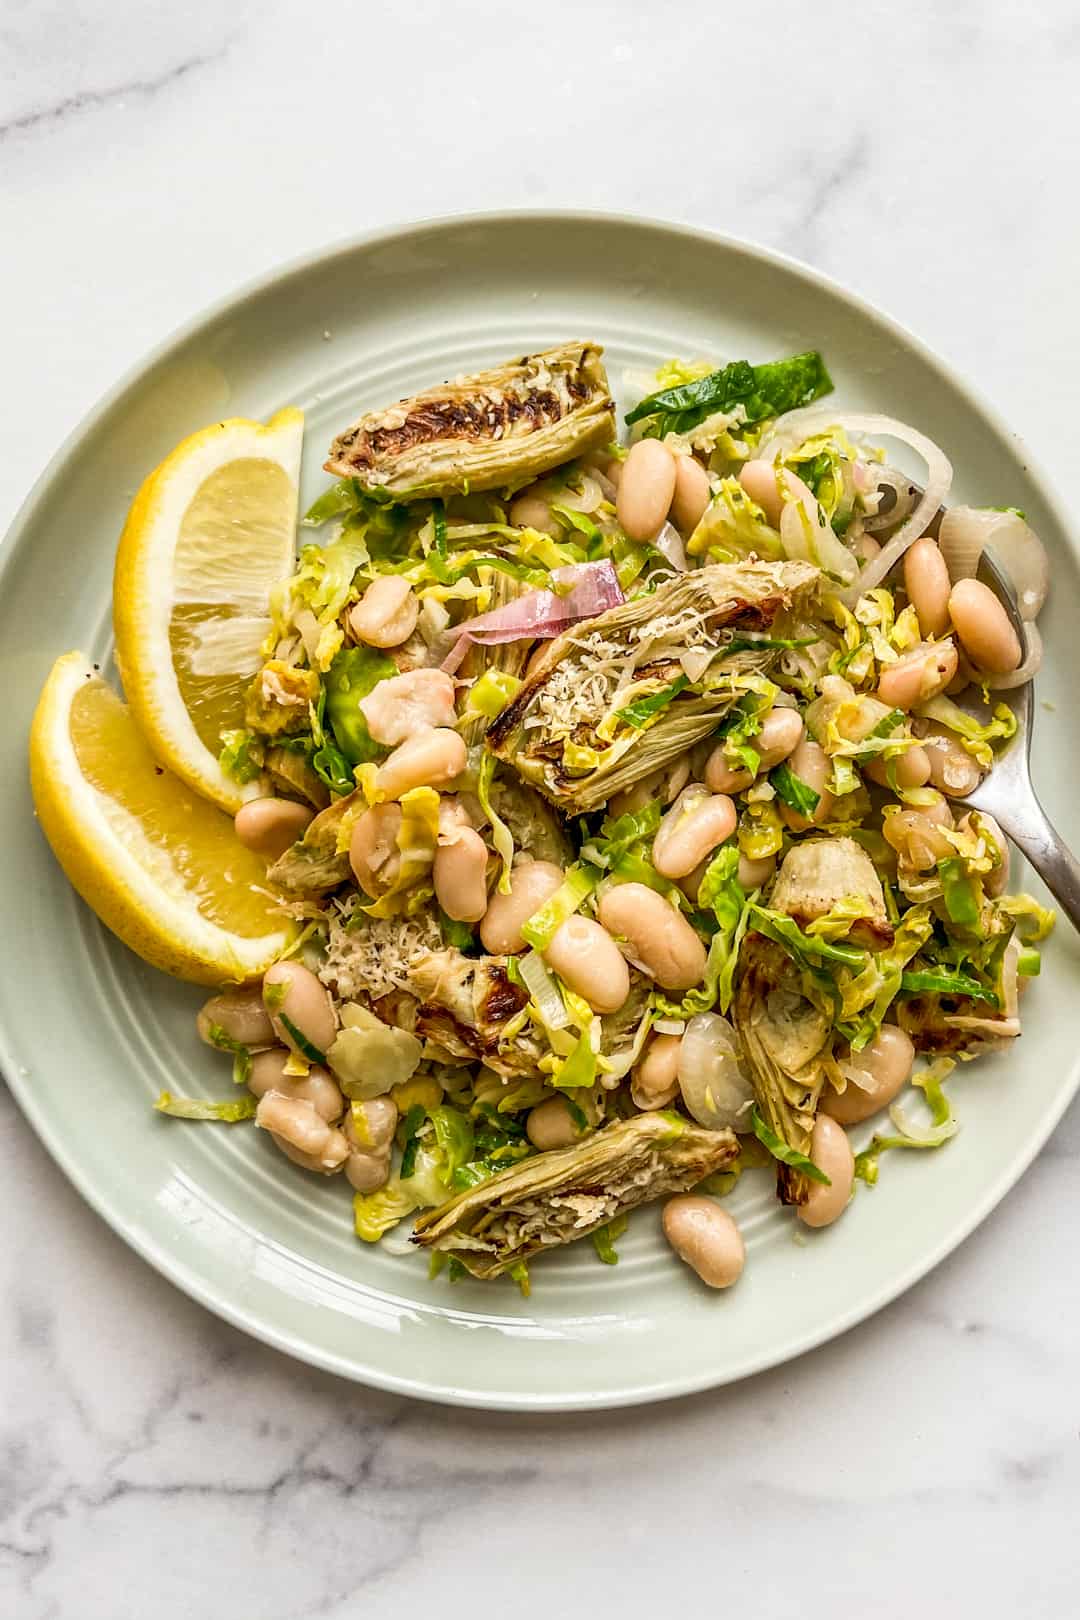 A Brussels sprouts, white bean, and roasted artichoke salad on a plate.